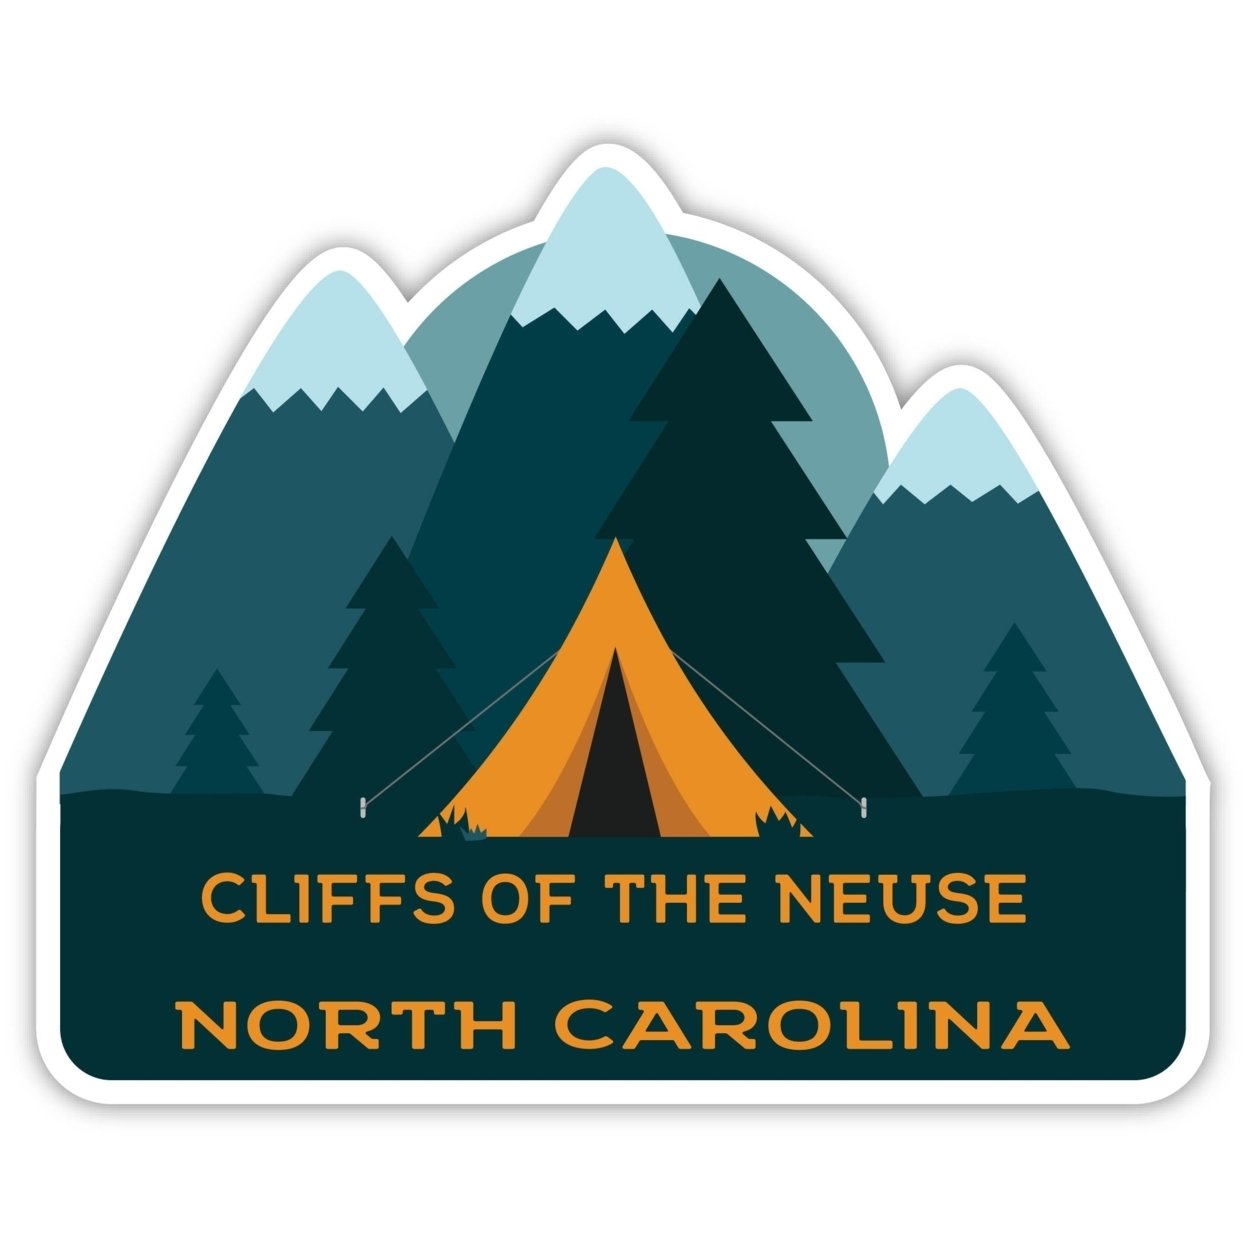 Cliffs Of The Neuse North Carolina Souvenir Decorative Stickers (Choose Theme And Size) - 4-Pack, 6-Inch, Tent